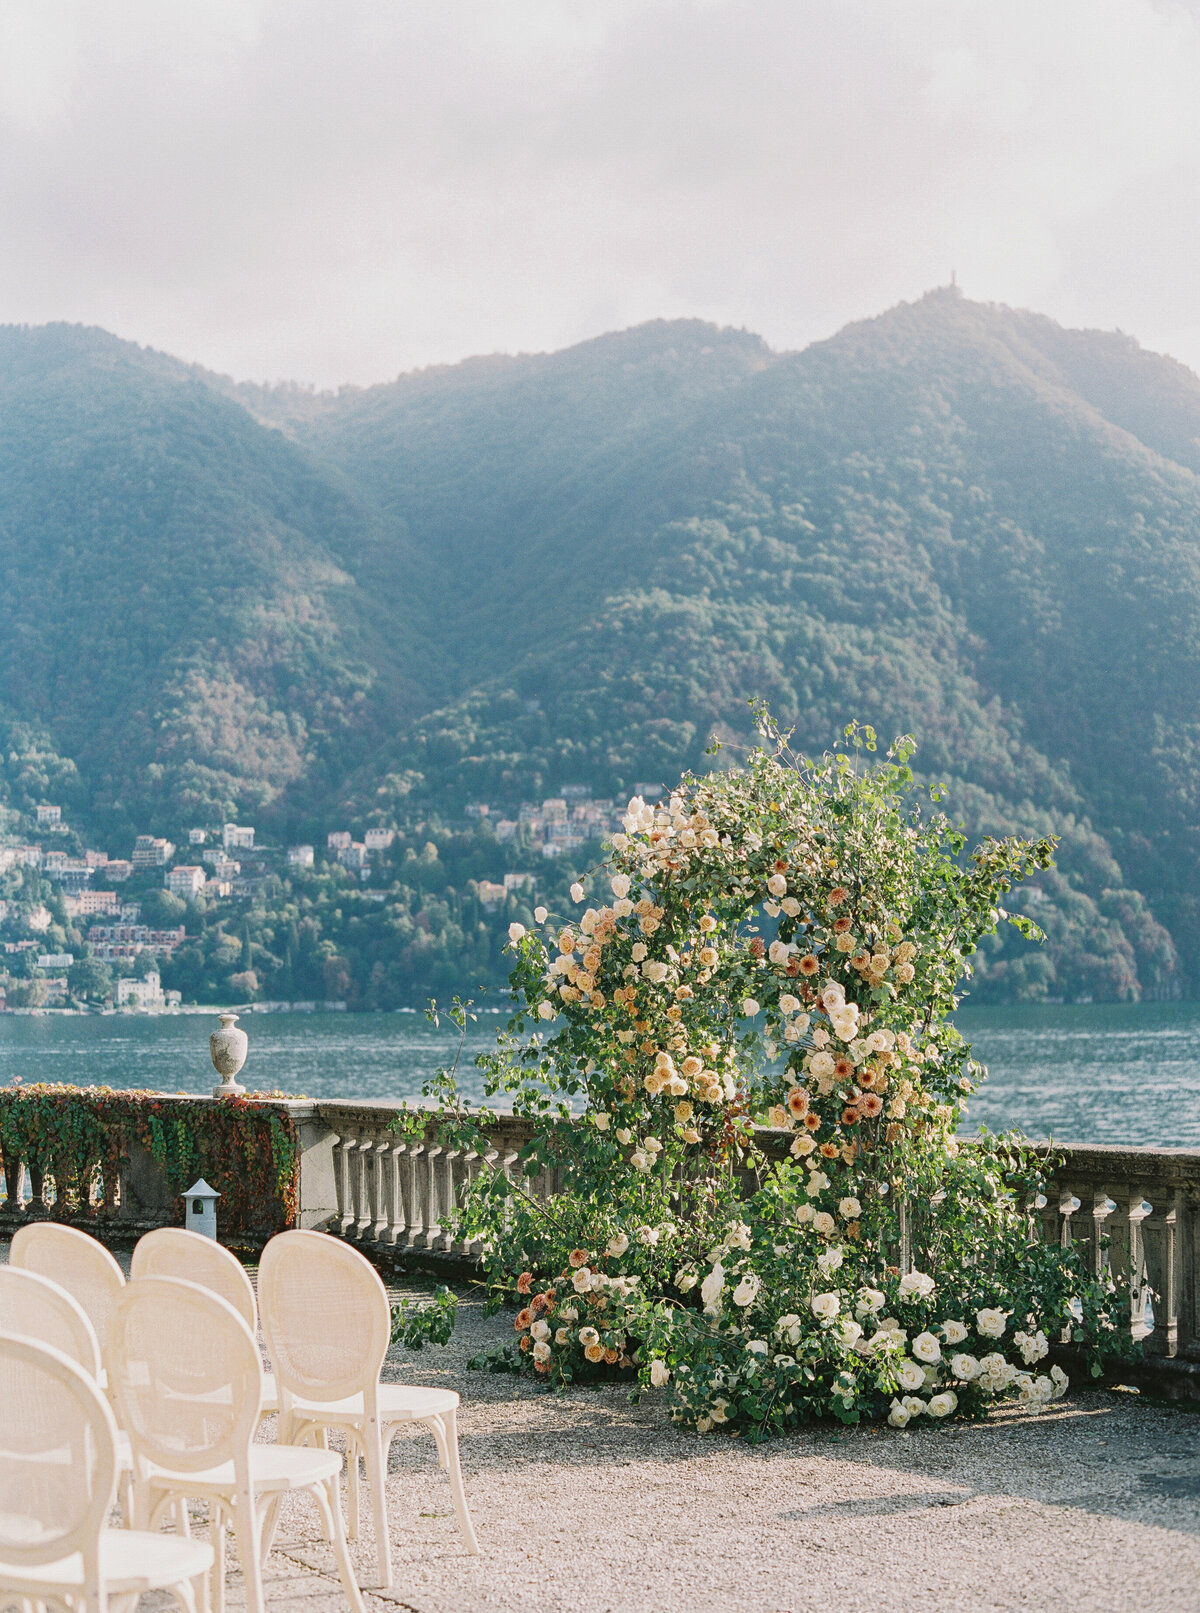 Liz Andolina Photography Destination Wedding Photographer in Italy, New York, Across the East Coast Editorial, heritage-quality images for stylish couples Villa Pizzo Editorial-Liz Andolina Photography-288